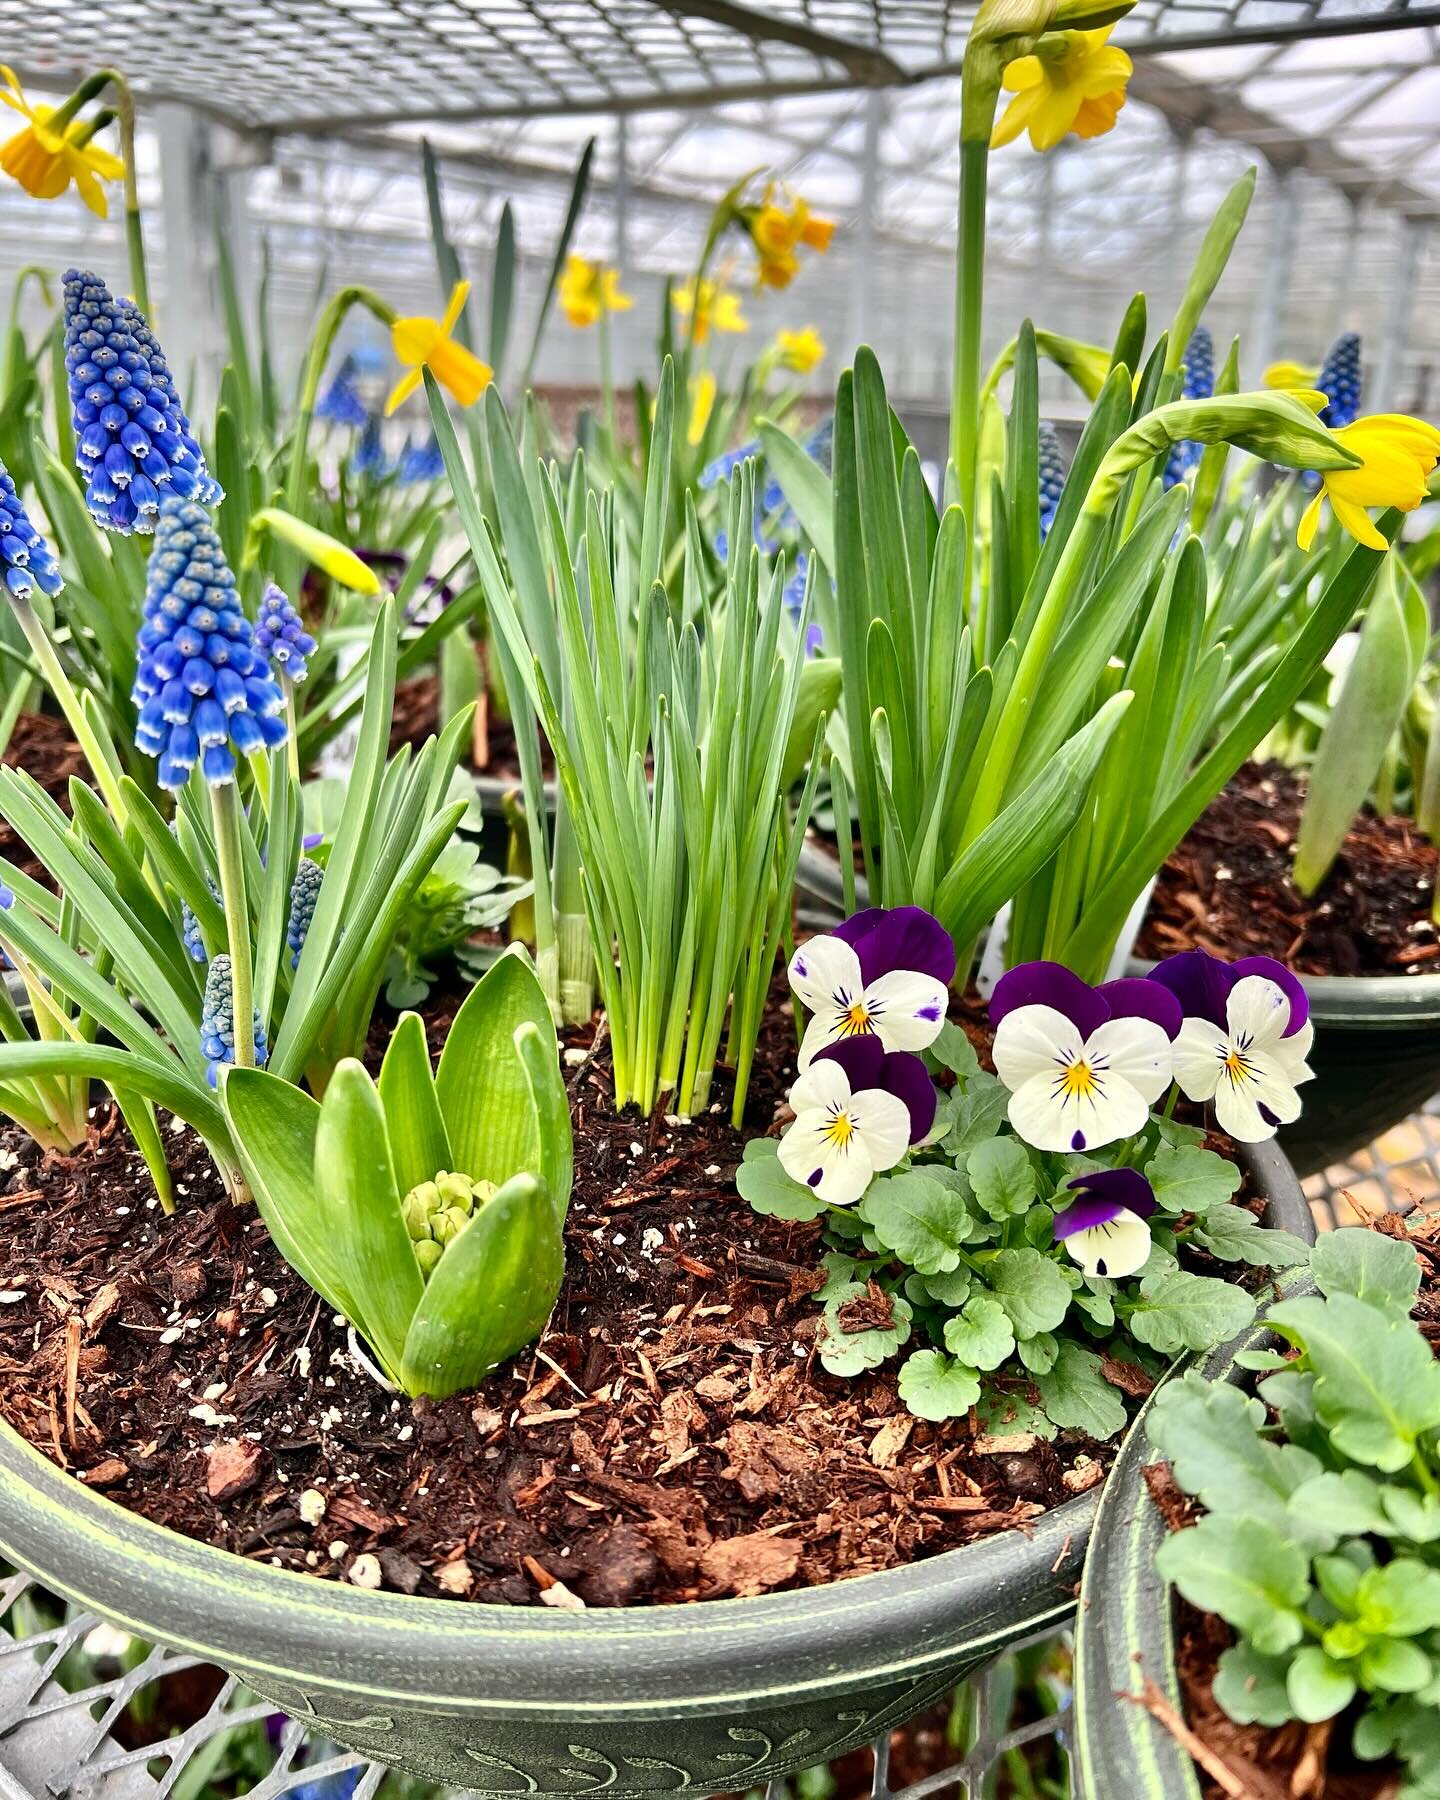 Pick up an early spring color bowl to pretty up your front porch ☀️ Now available at our shop in town!

#local #pnw #flowers #flowershop #gardenlove #plants #plantsmakepeoplehappy #love #horticulture #beautiful #instagood #windmillgardens #sumnerwa #